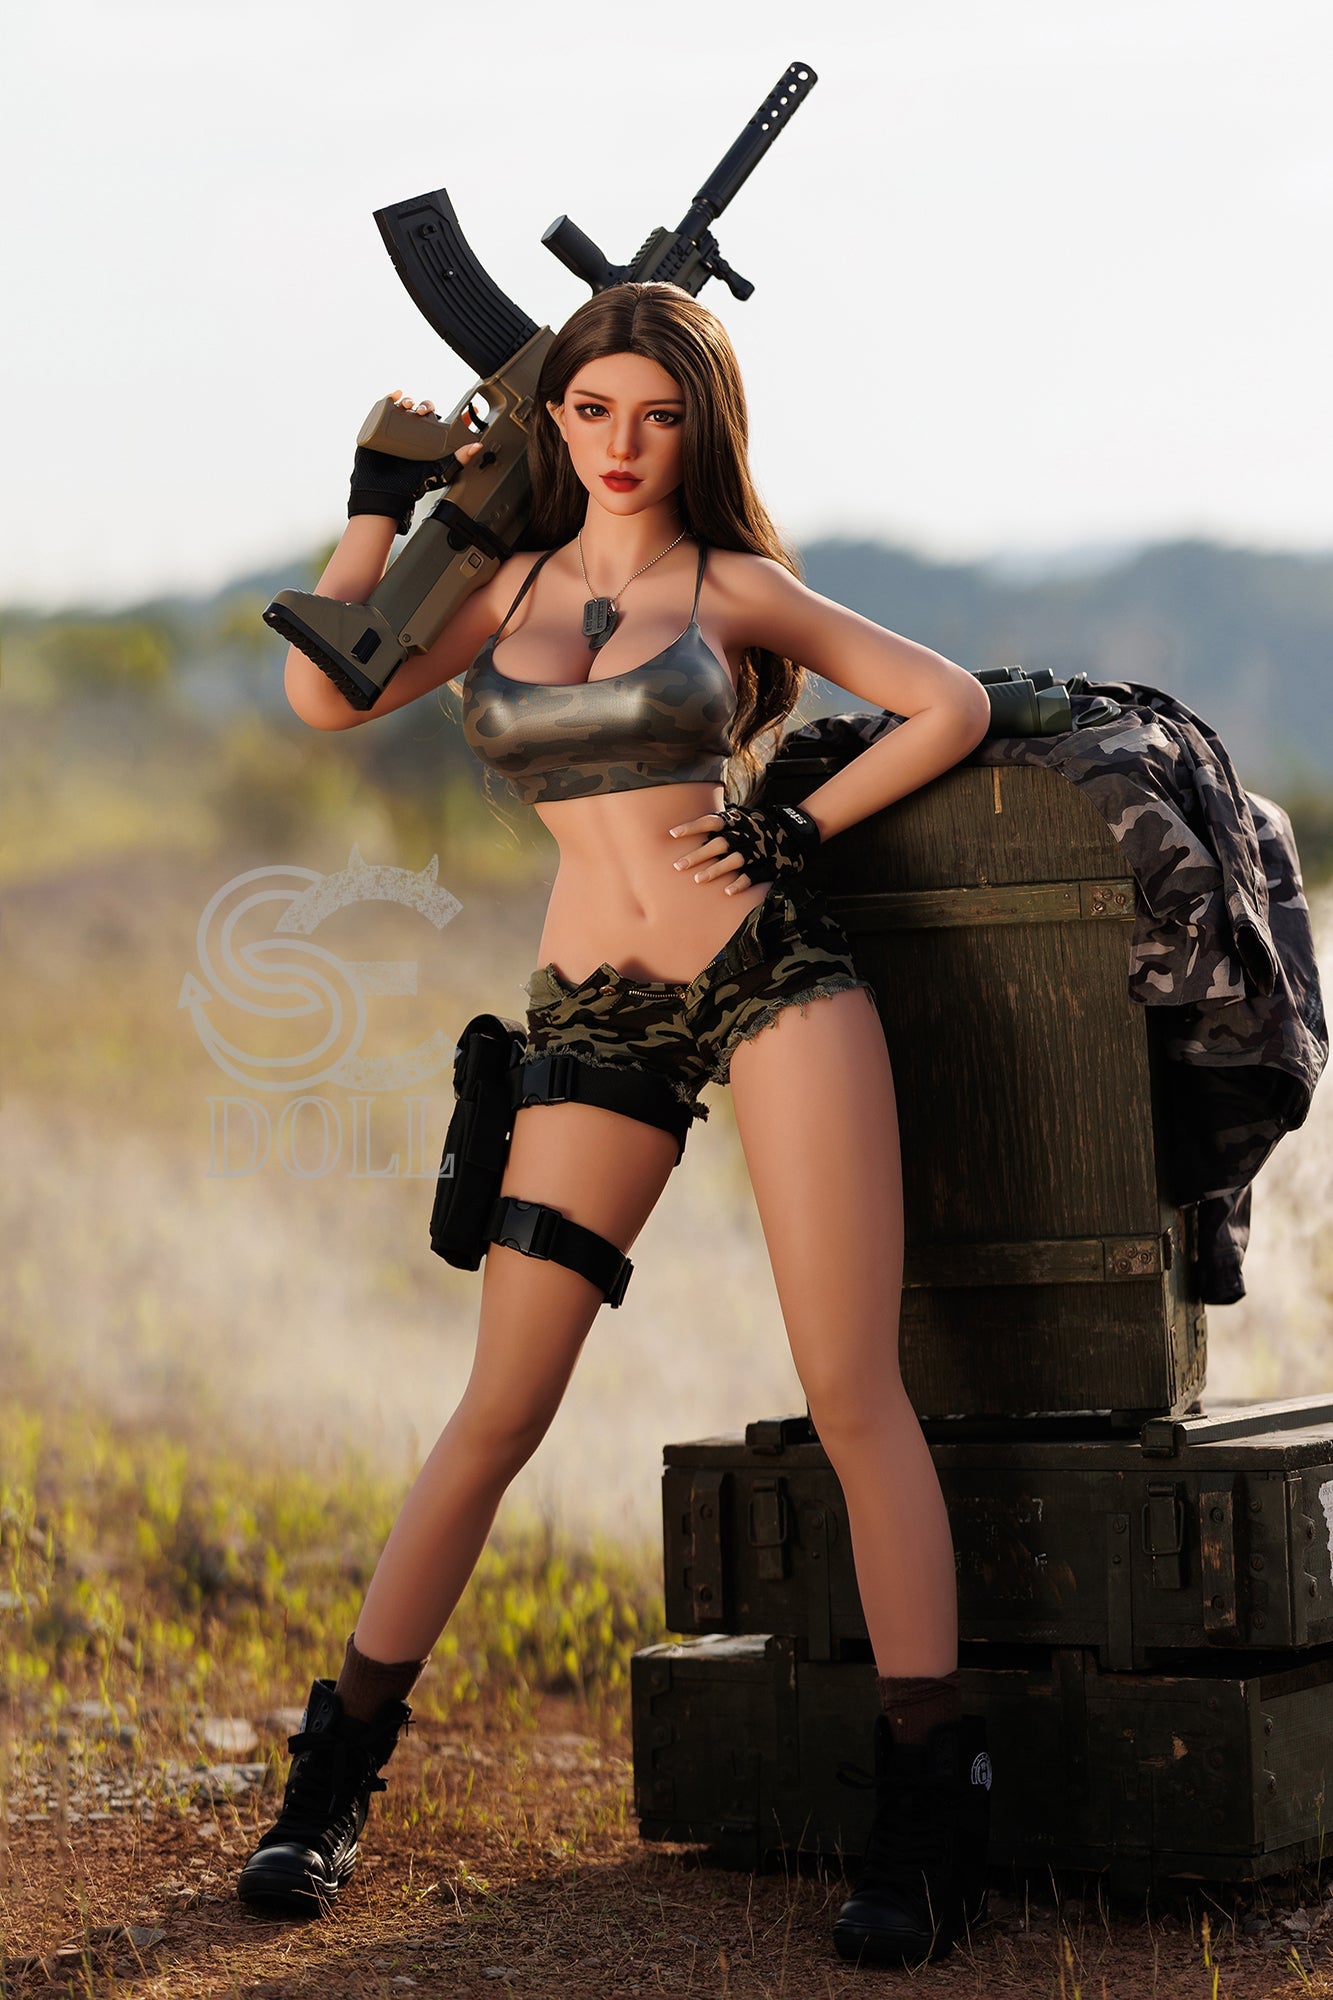 SEDOLL 161 cm F TPE - Queena (USA) | Buy Sex Dolls at DOLLS ACTUALLY